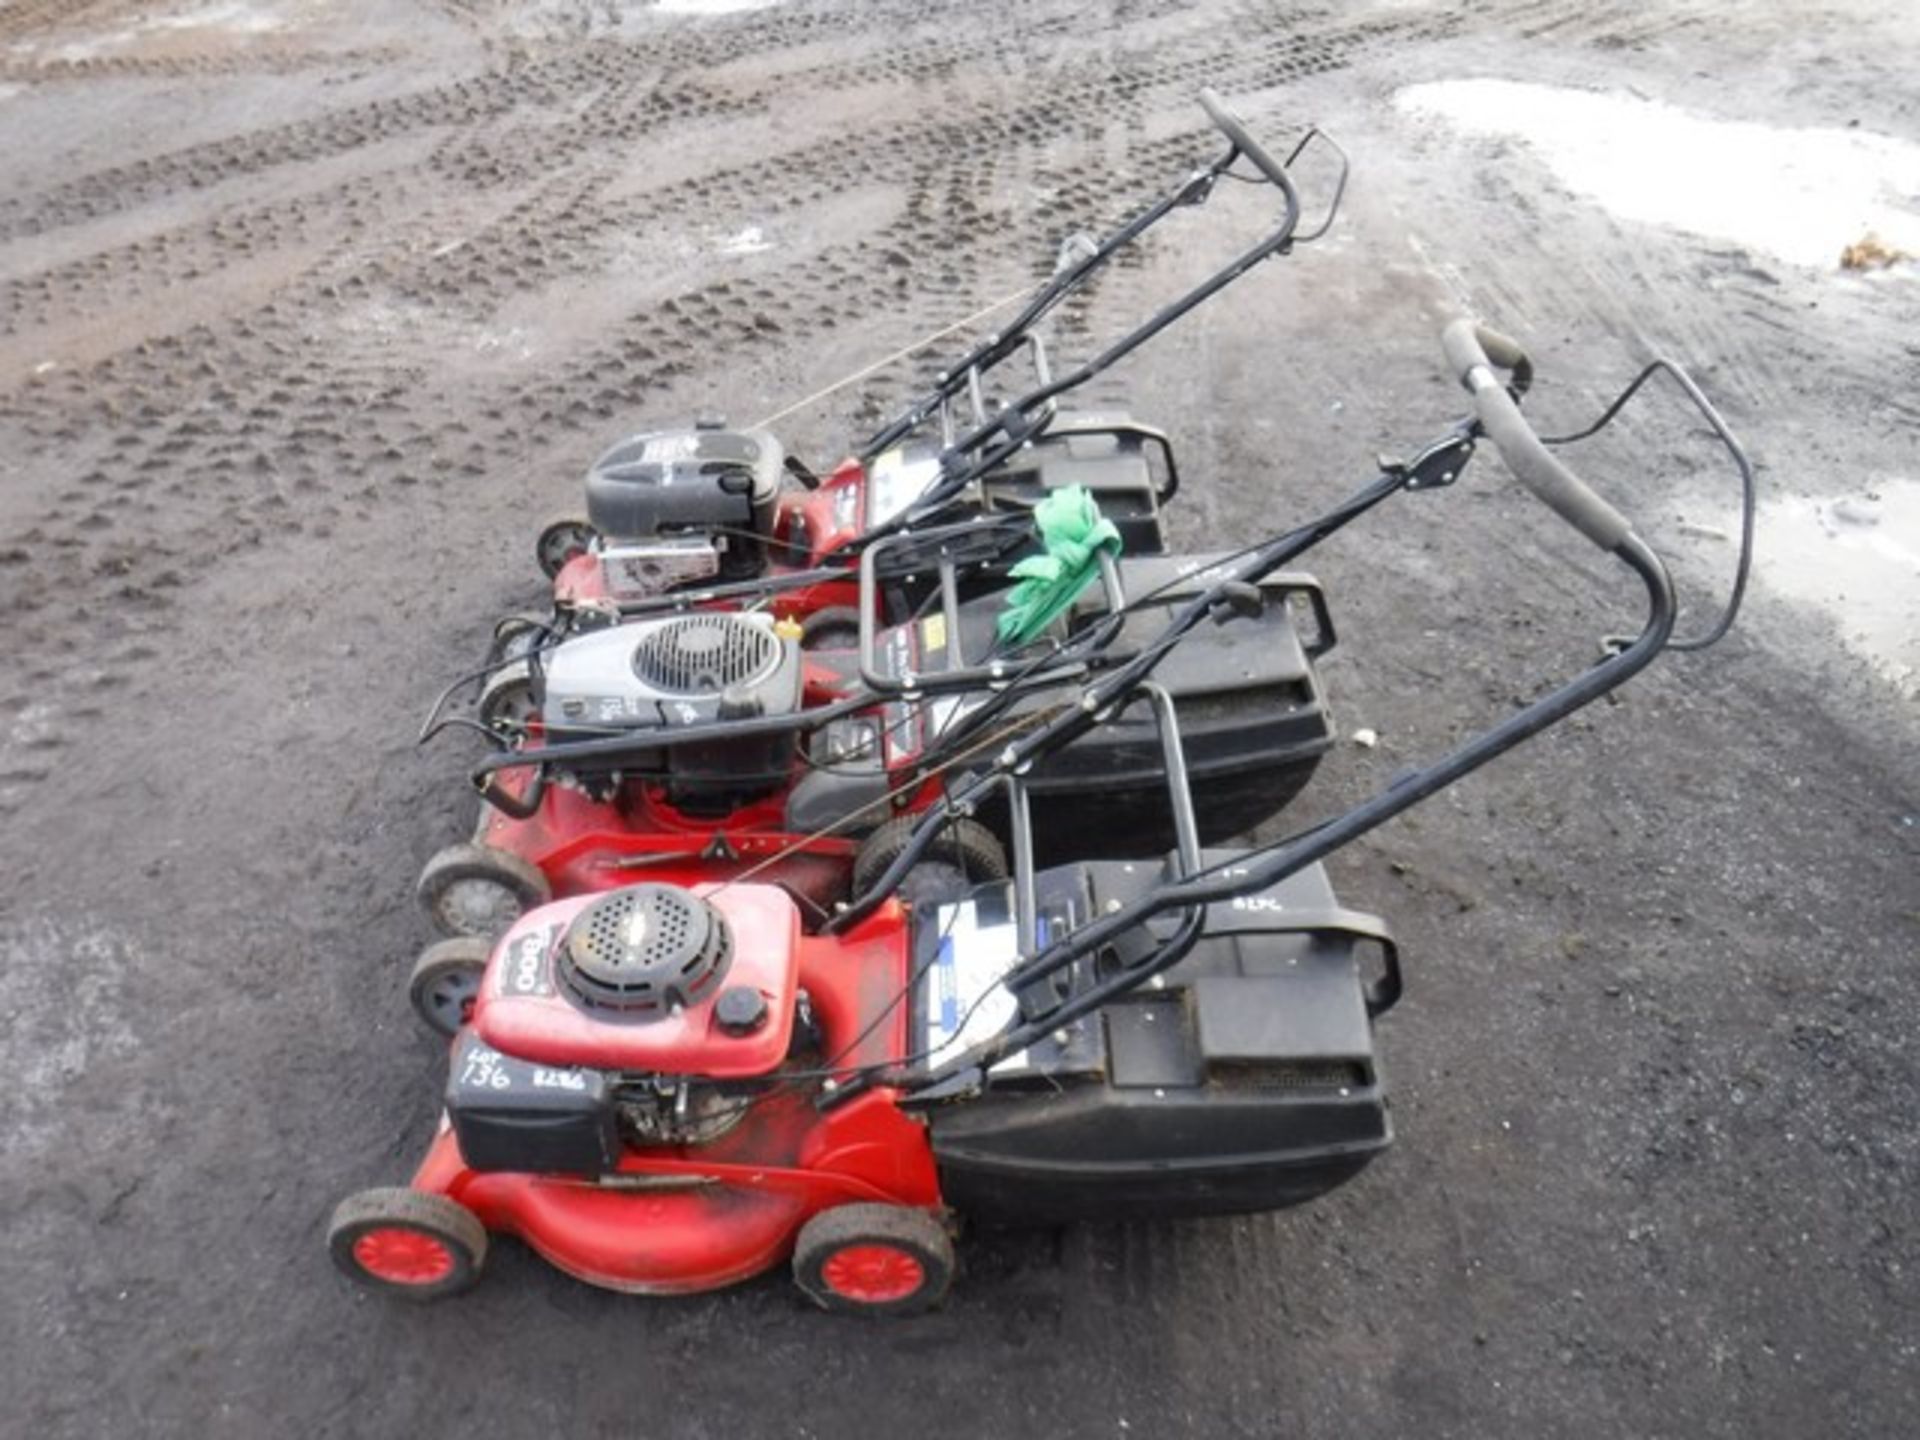 2 x ROVER REGAL petrol mowers and 1 x Rover Pro Cut 560 self propelled mower c/w back boxes